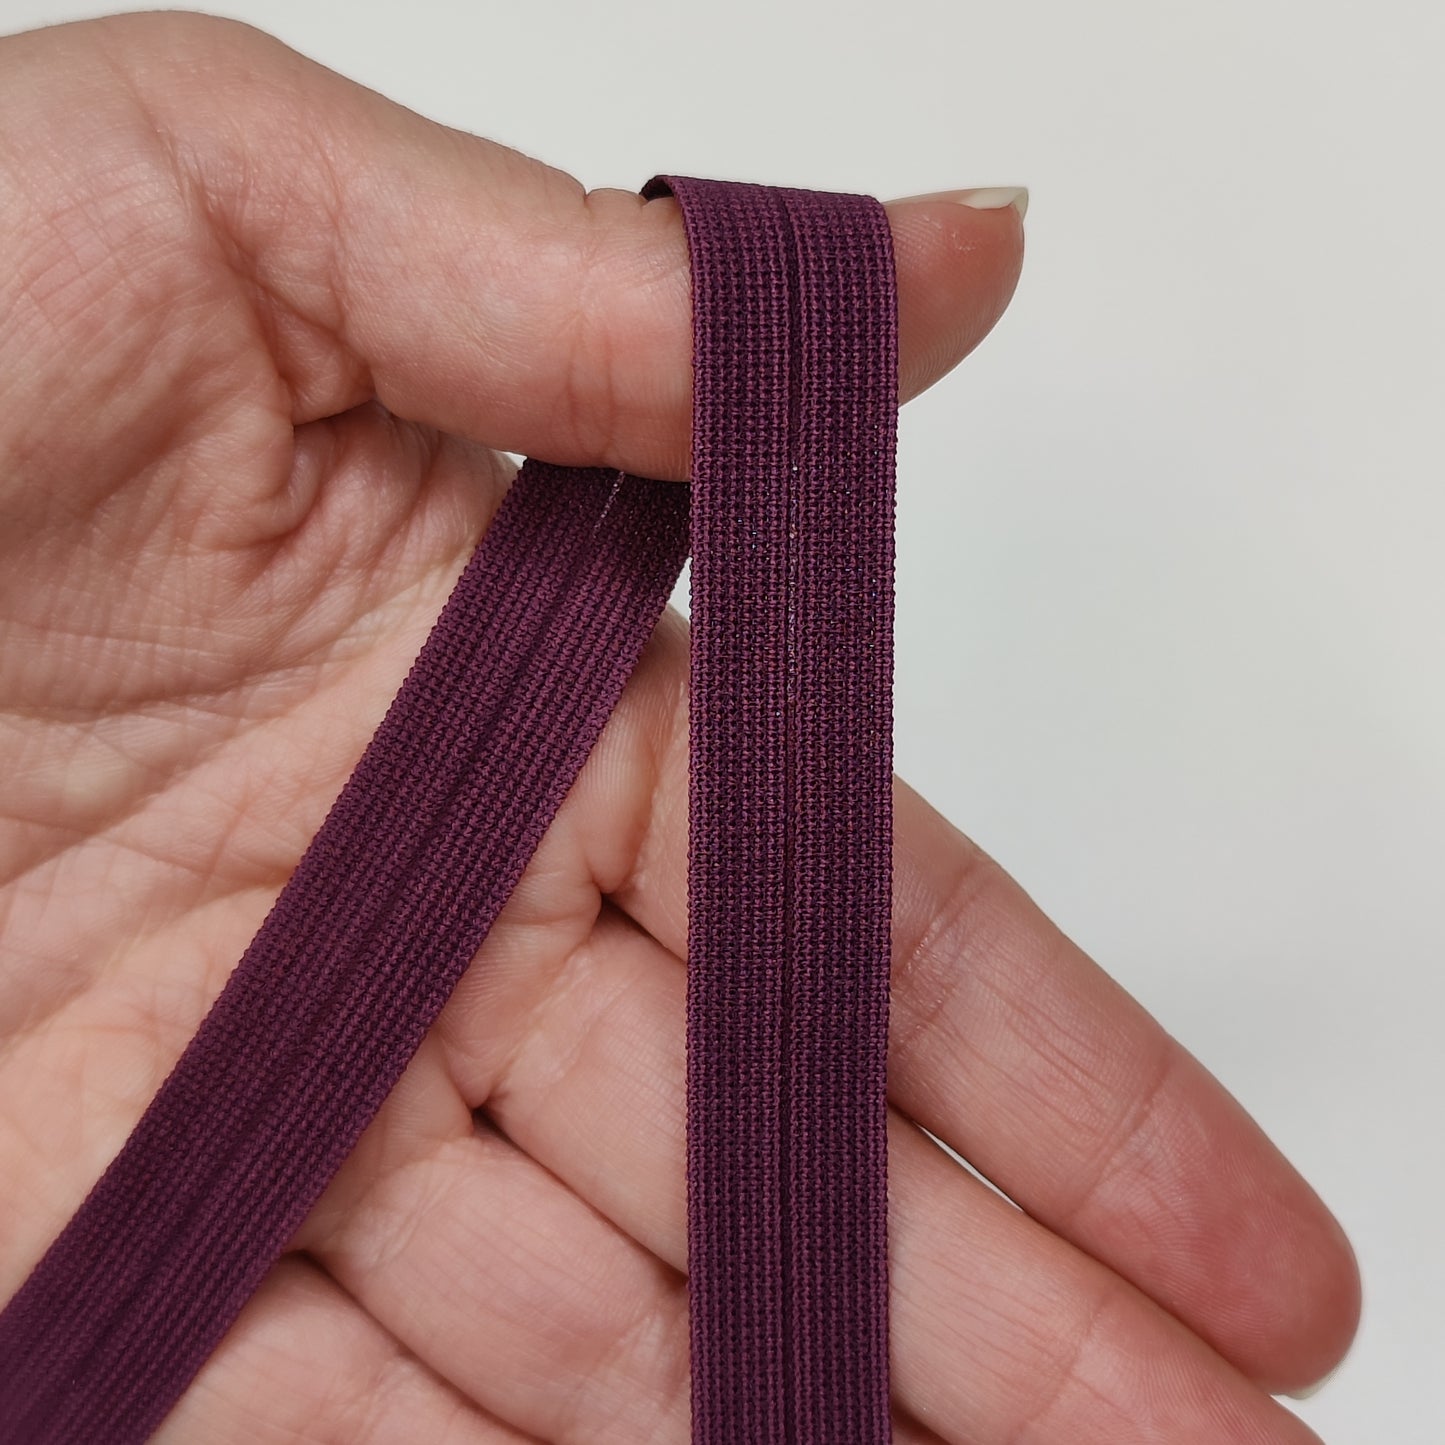 Folding rubber, edging rubber, piping rubber, foldable elastic band in bordeaux, plum, cream, brown, red-orange. IDelx19